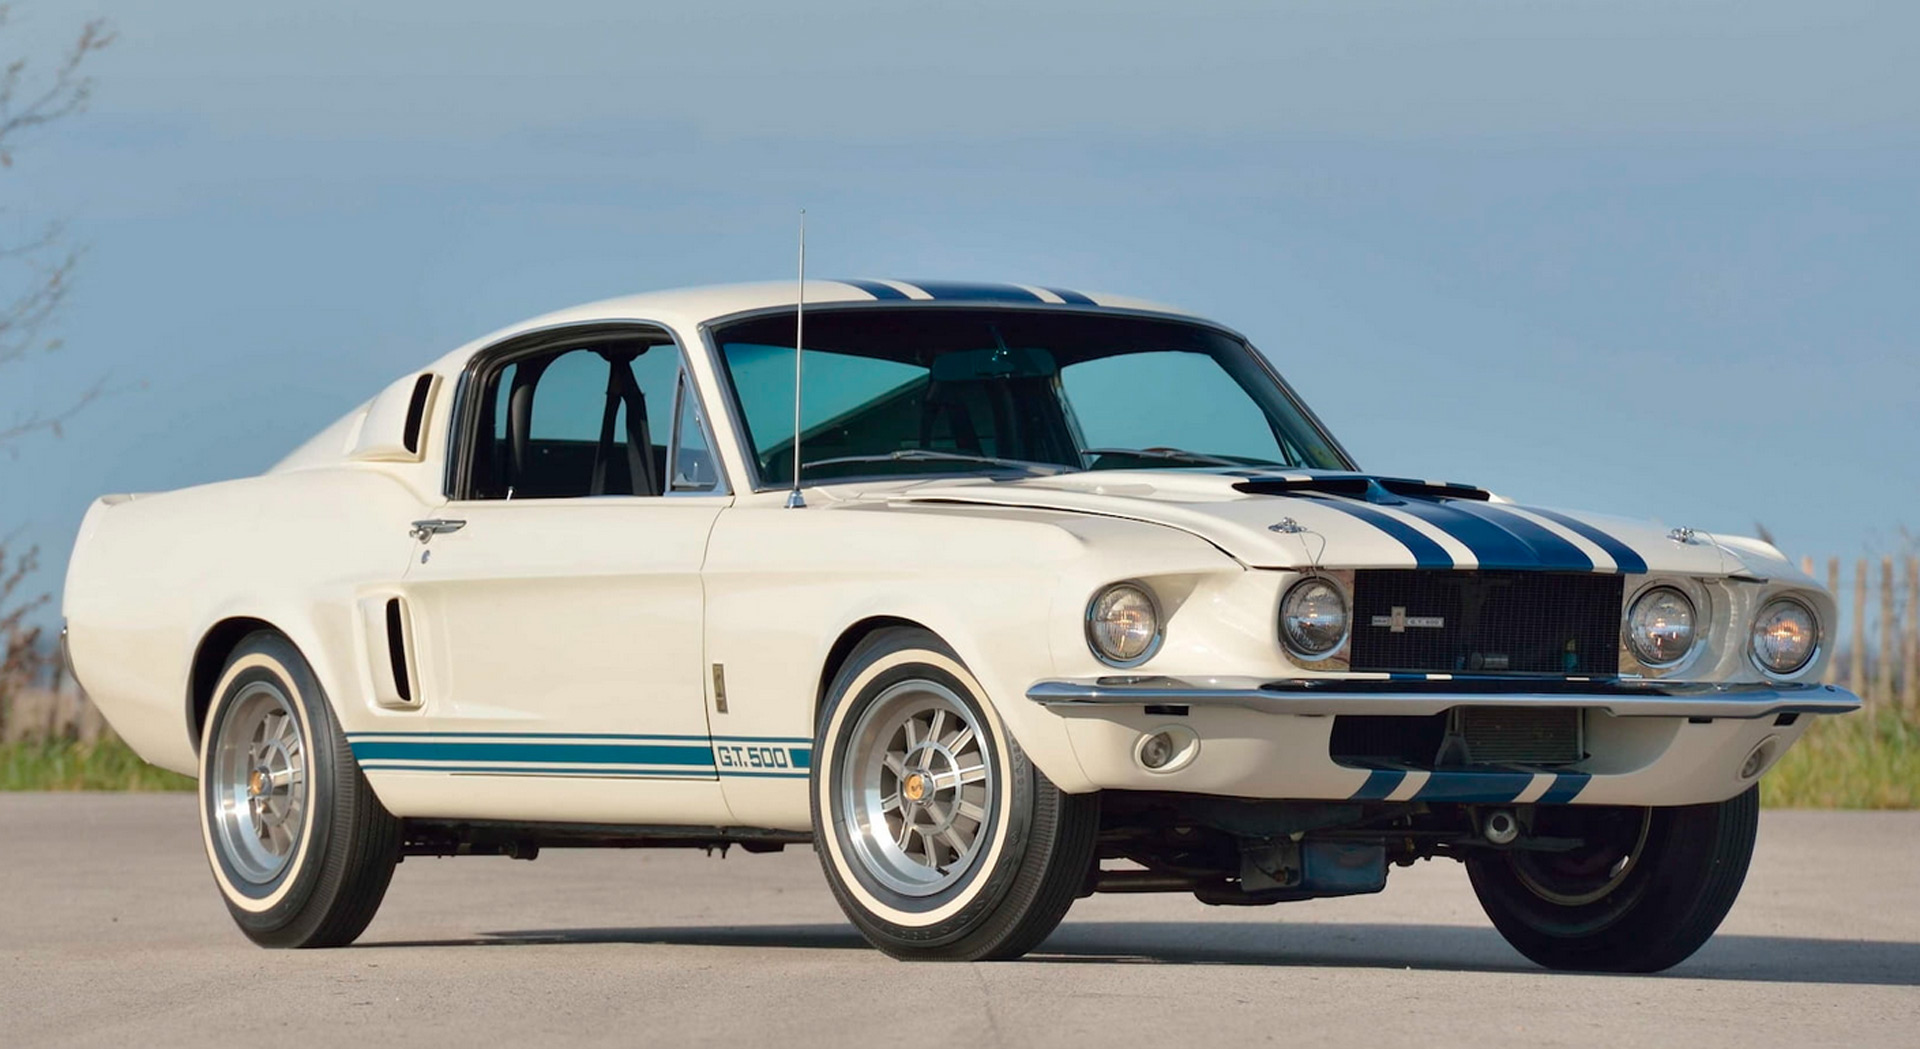 1967 Shelby GT500 Super Snake sells for $2.2M, making it world's most  expensive Mustang